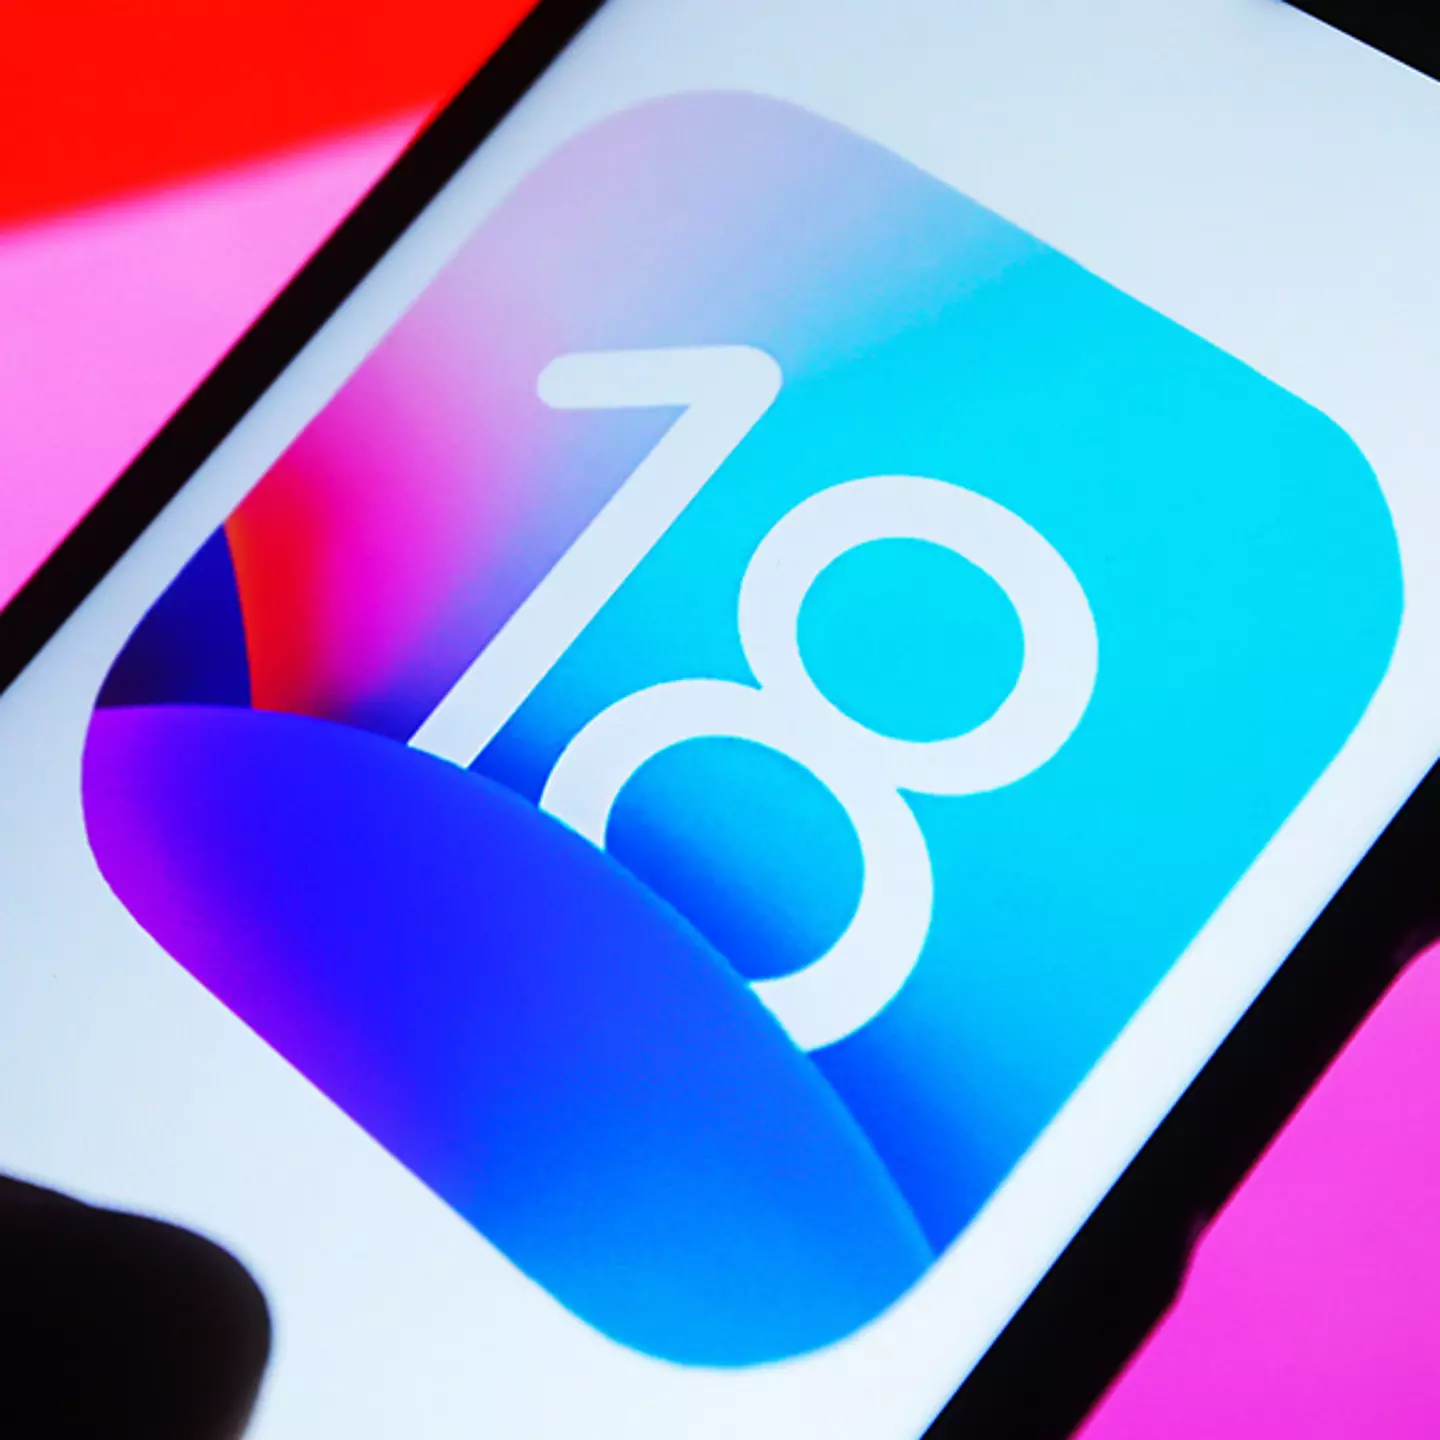 iOS 18 set to have the biggest appearance change since iOS 7